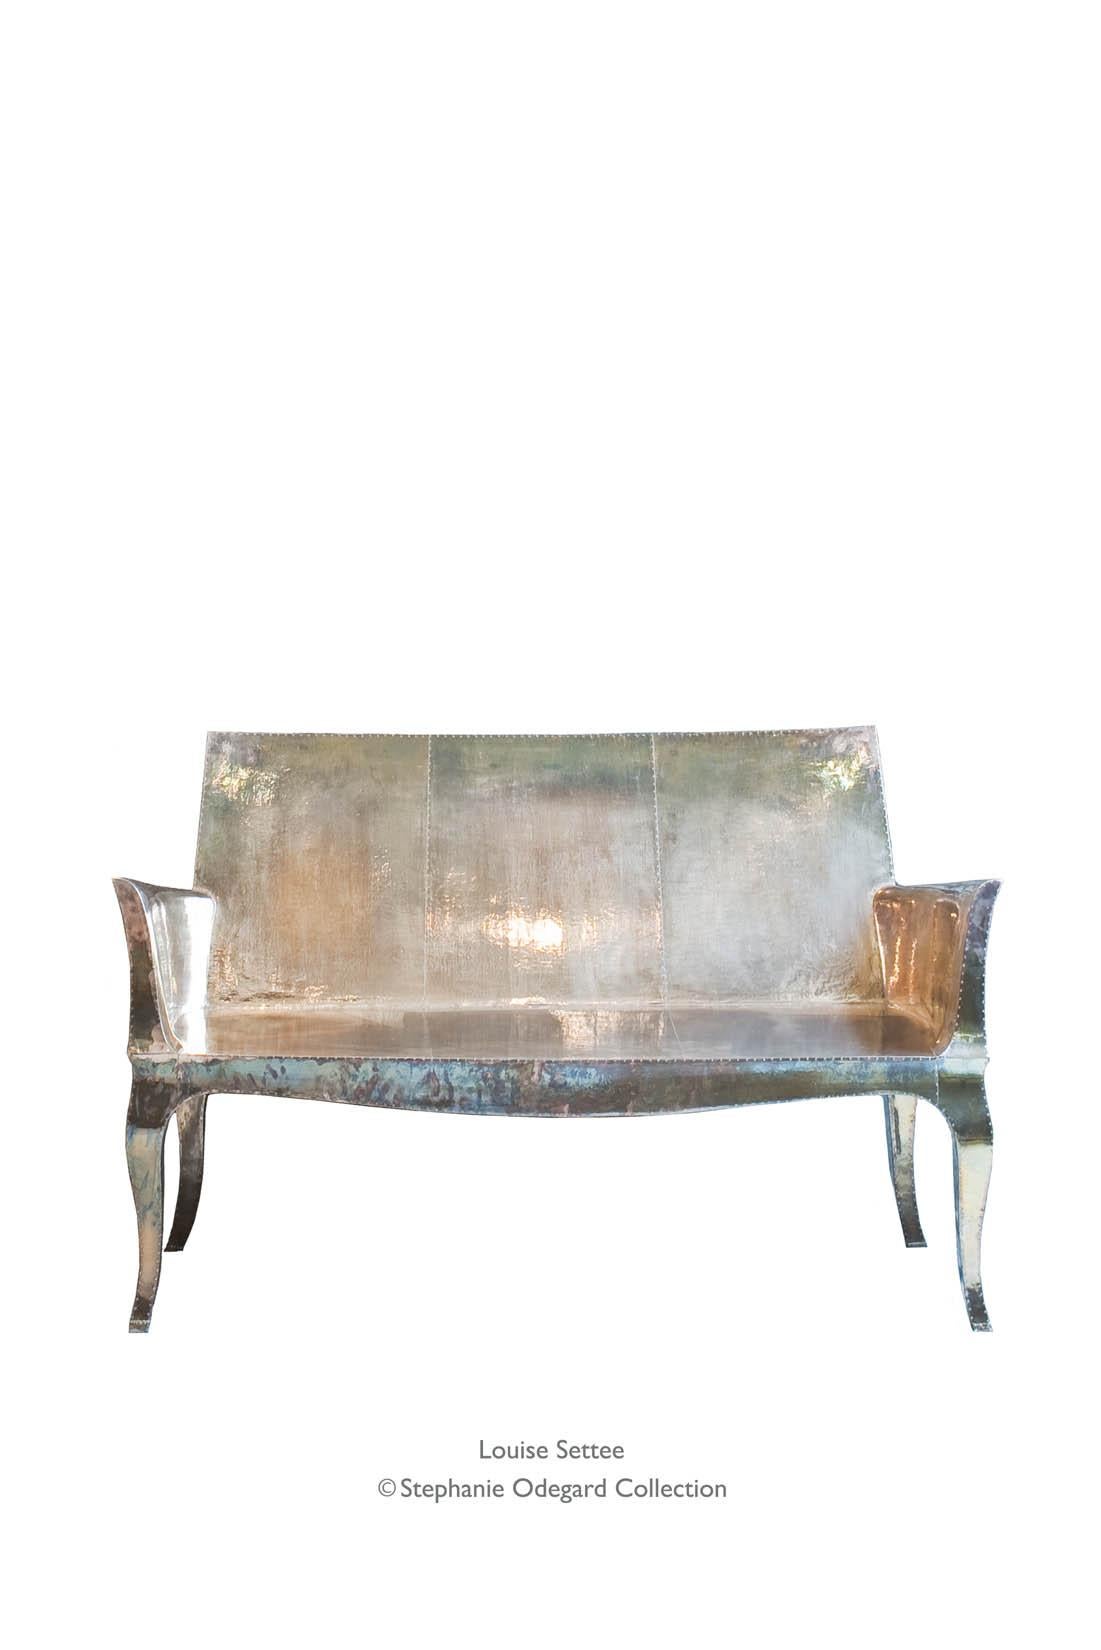 Louise Settee Art Deco Settees in Smooth Copper by Paul Mathieu for S Odegard For Sale 7